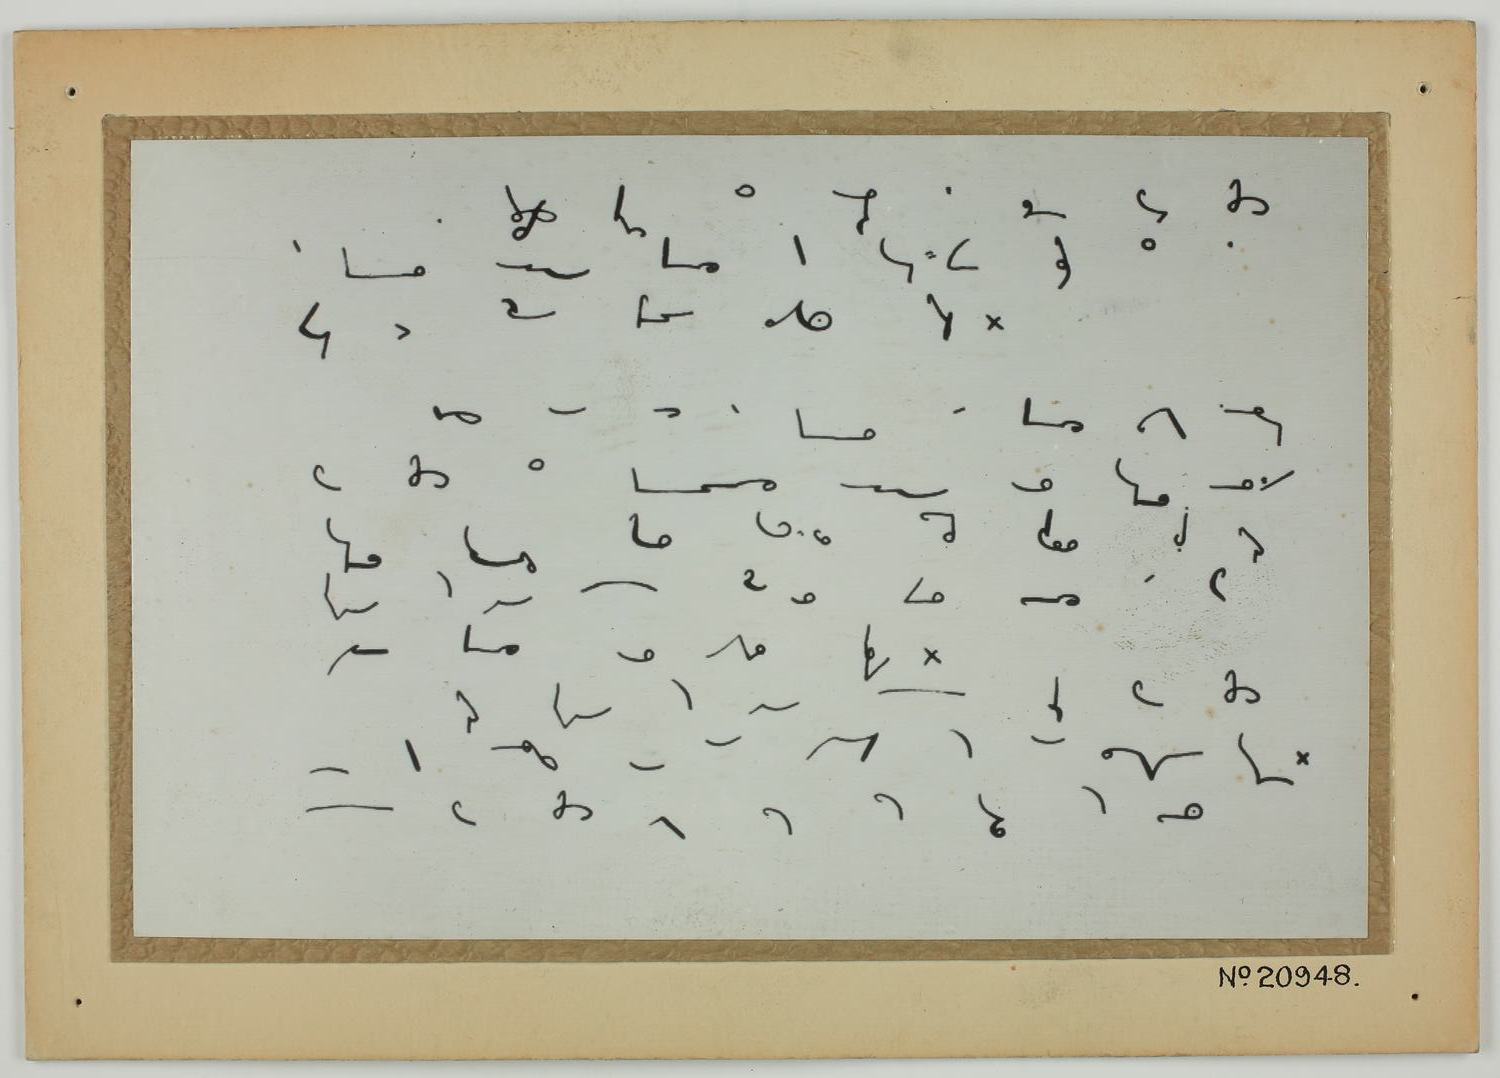 An example of shorthand writing on note paper